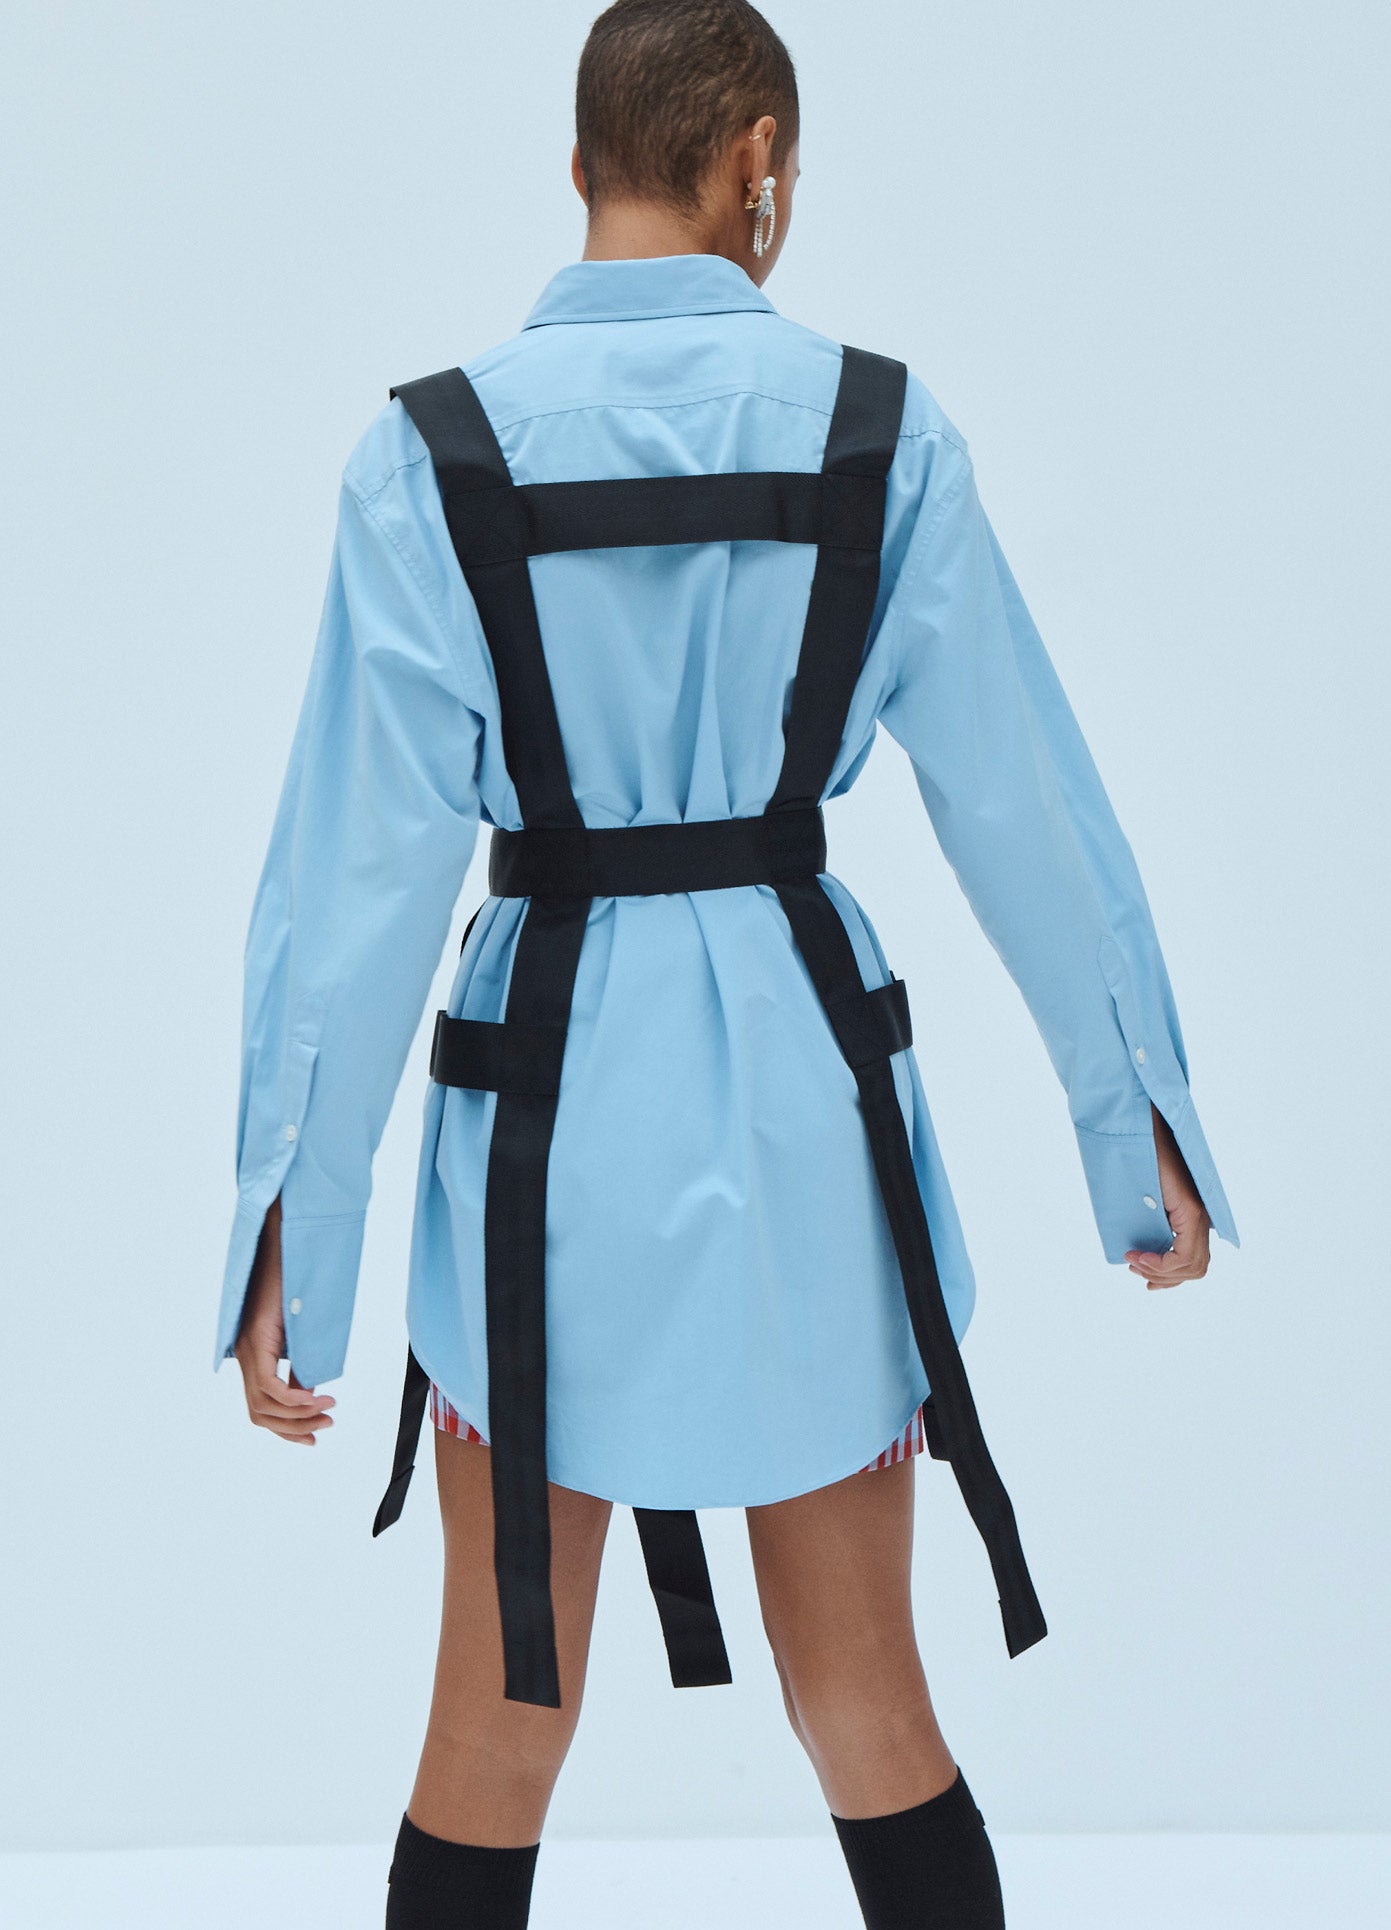 MONSE Strapped In Shirt Dress in Blue on Model Back View